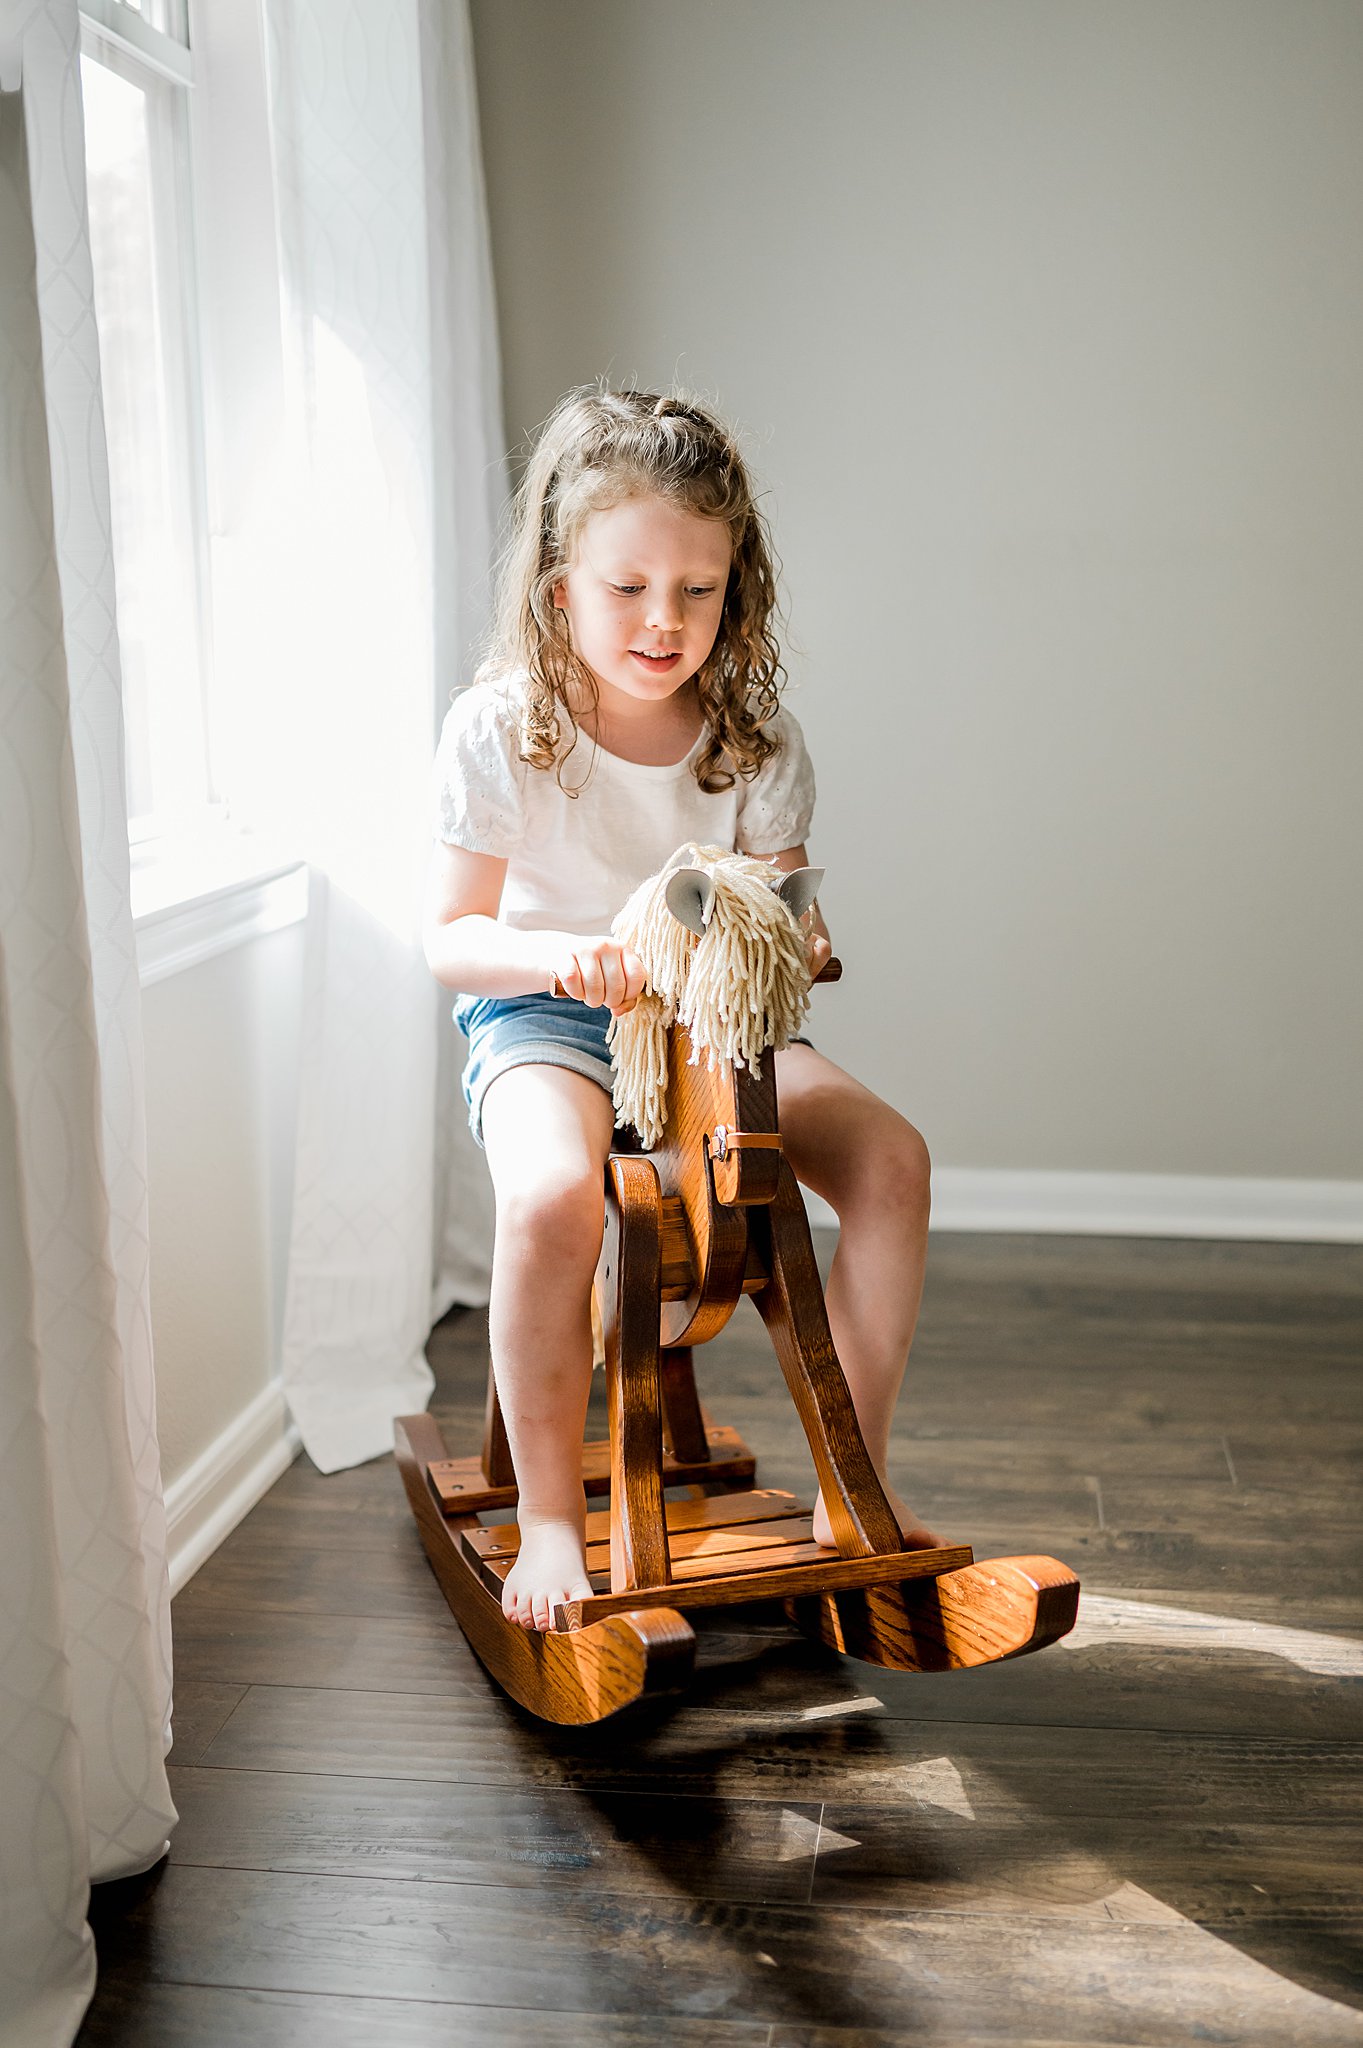 A young girl in a white shirt plays on a wooden rocking horse san antonio toy stores